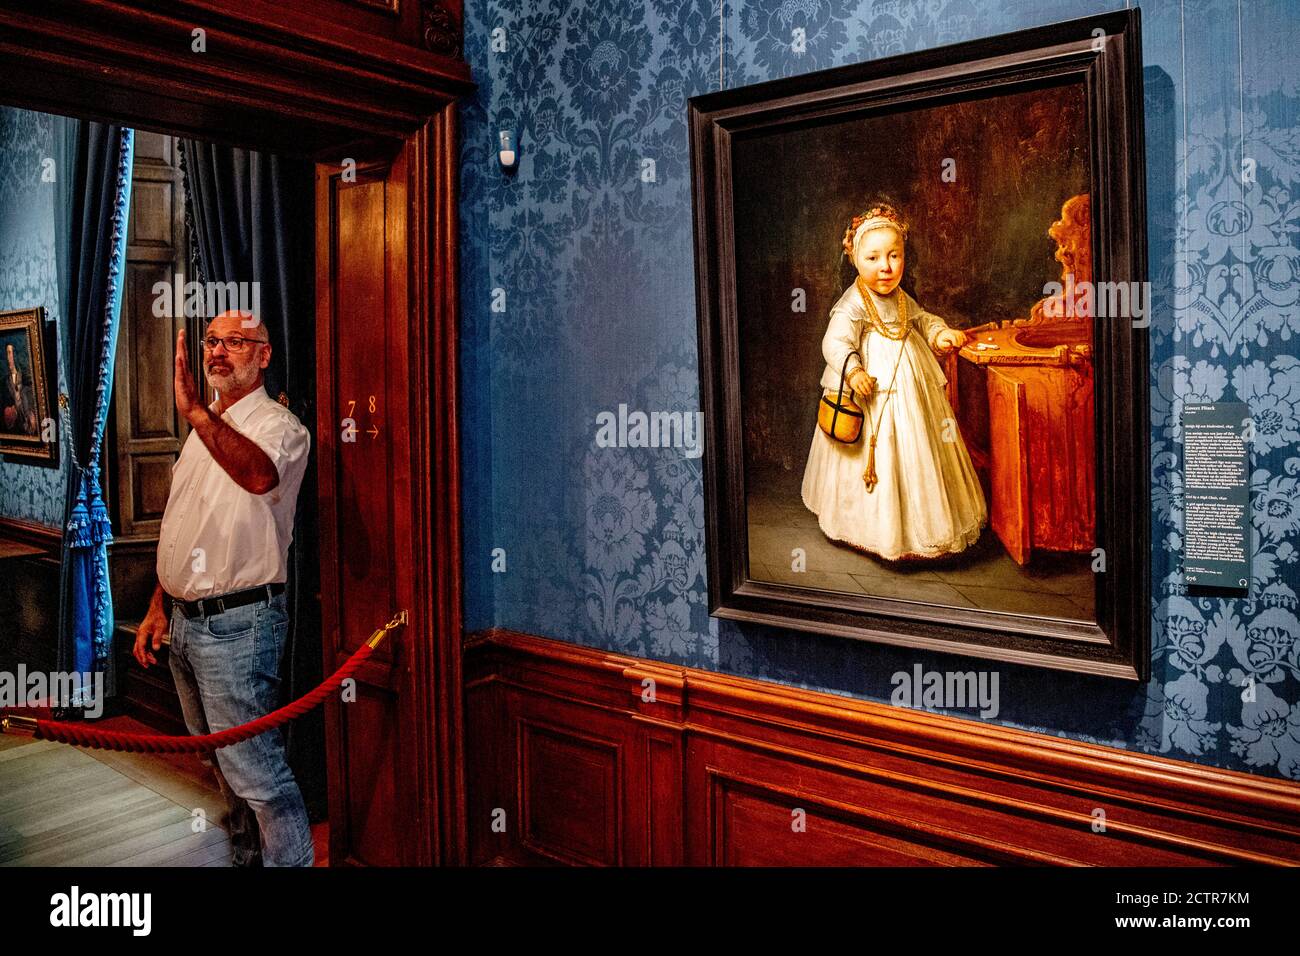 Painting in the new room.The Mauritshuis museum is furnishing a new room for a permanent presentation of works dedicated to Johan Maurits, Count of Nassau-Siegen and client of the Mauritshuis. Stock Photo